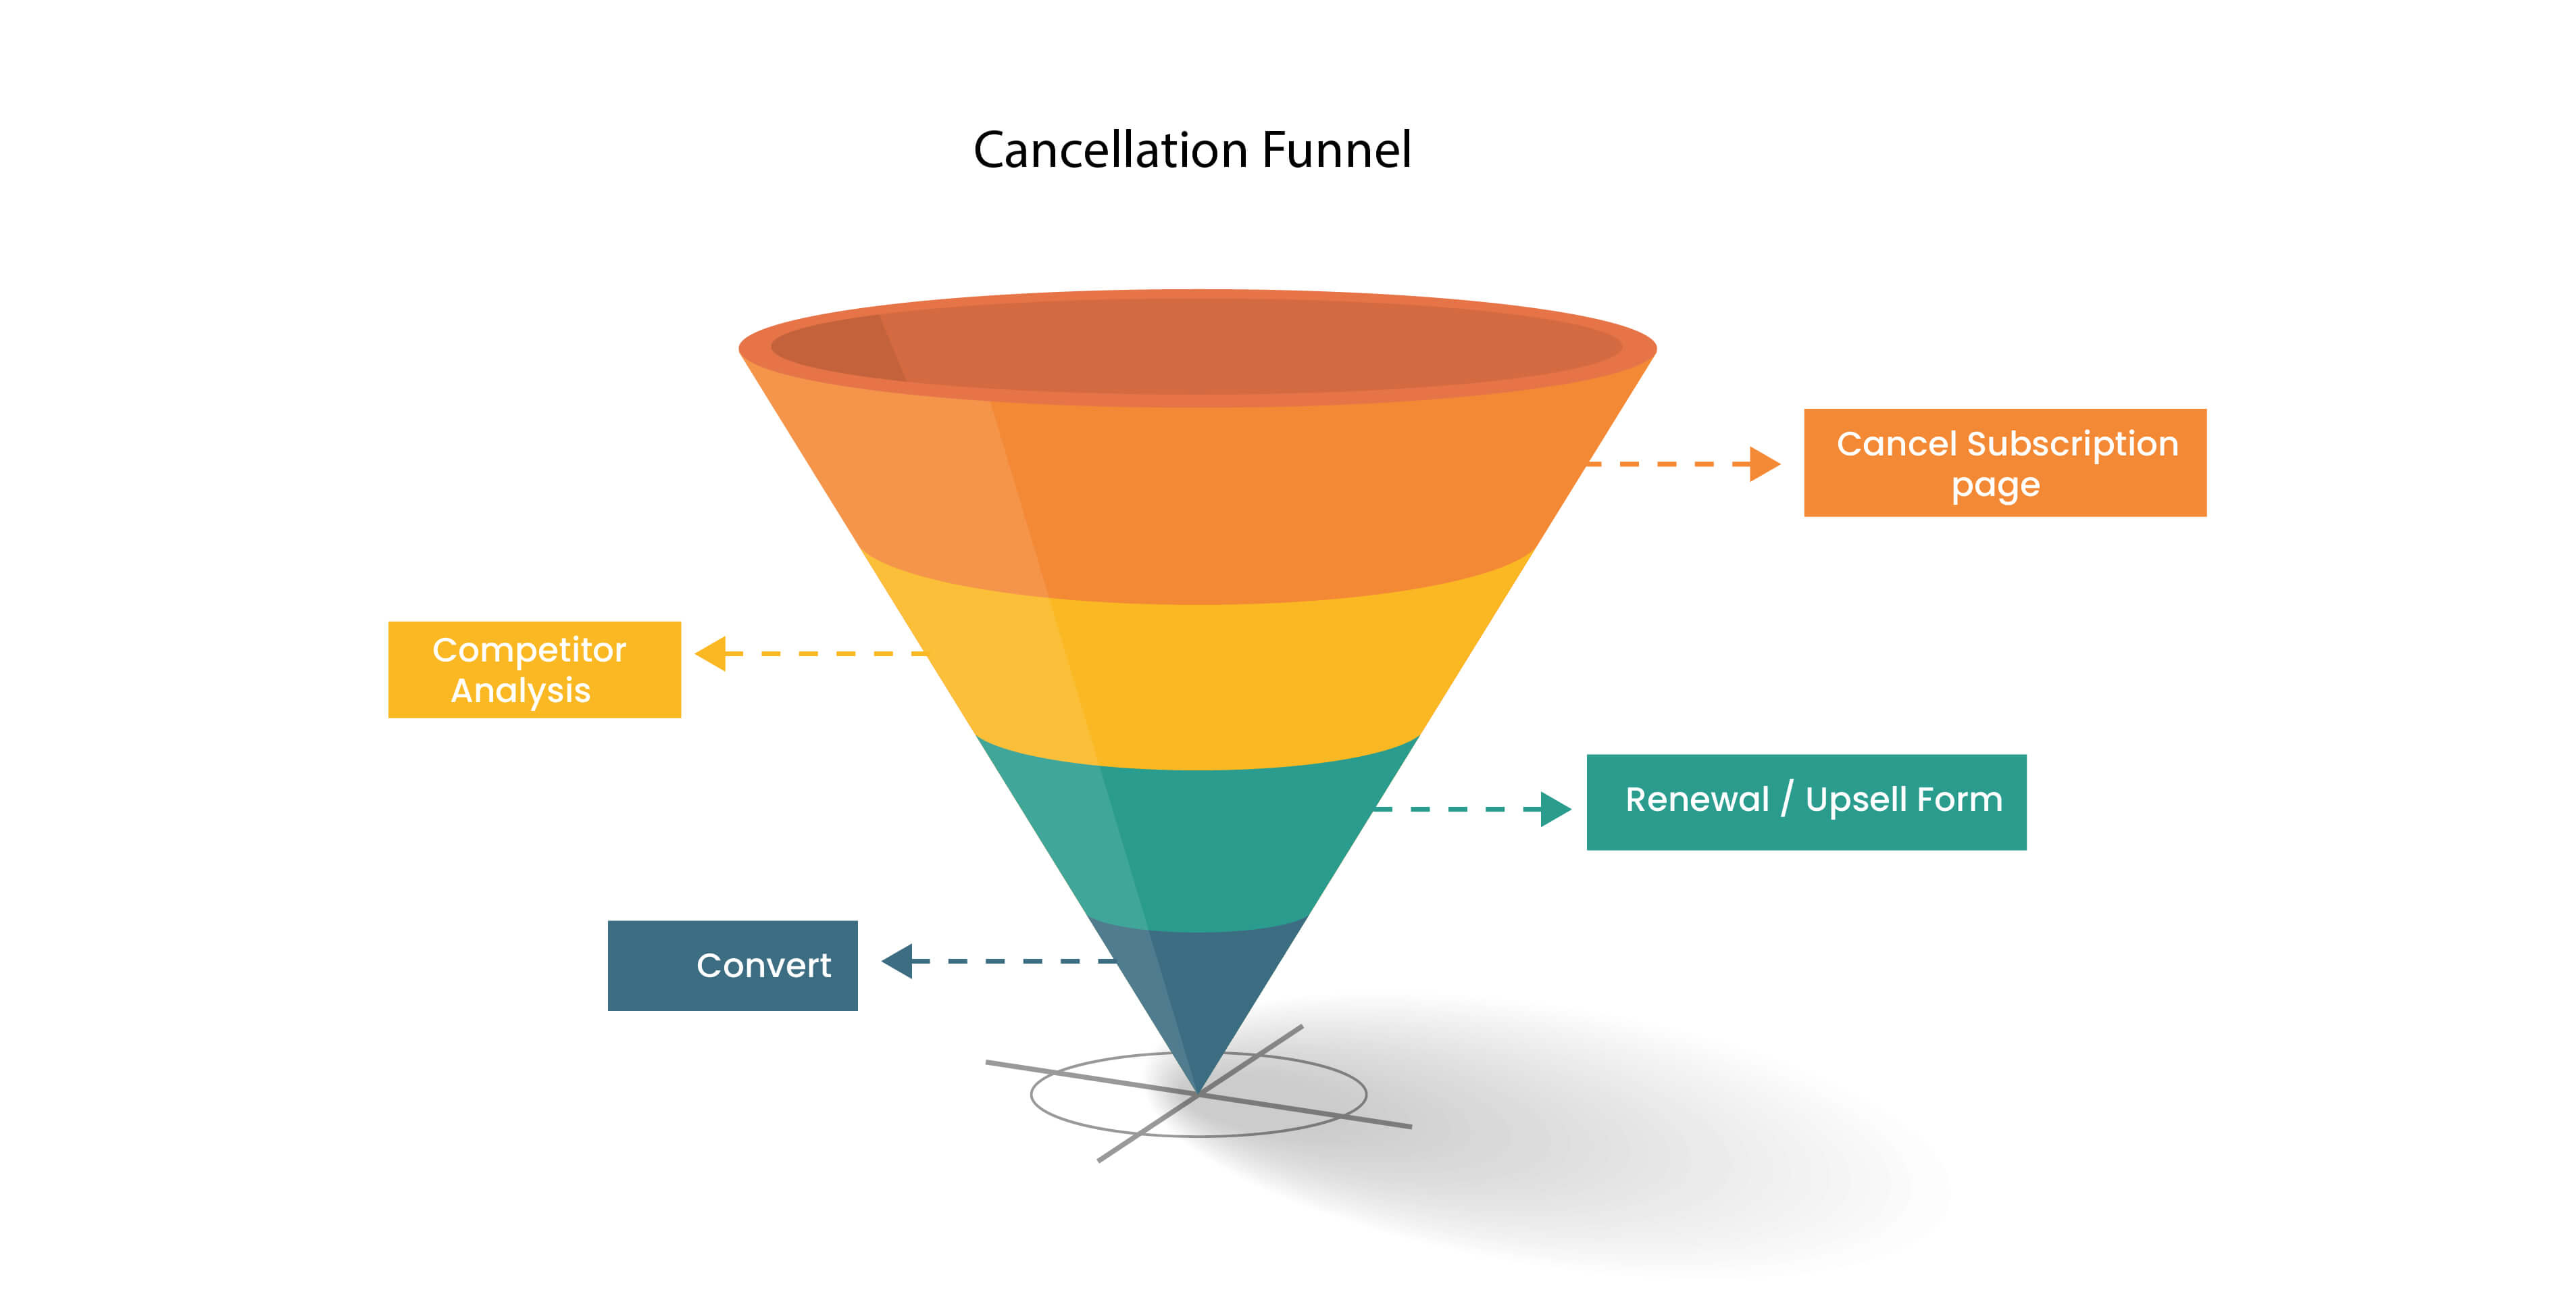 Cancellation sales funnel template